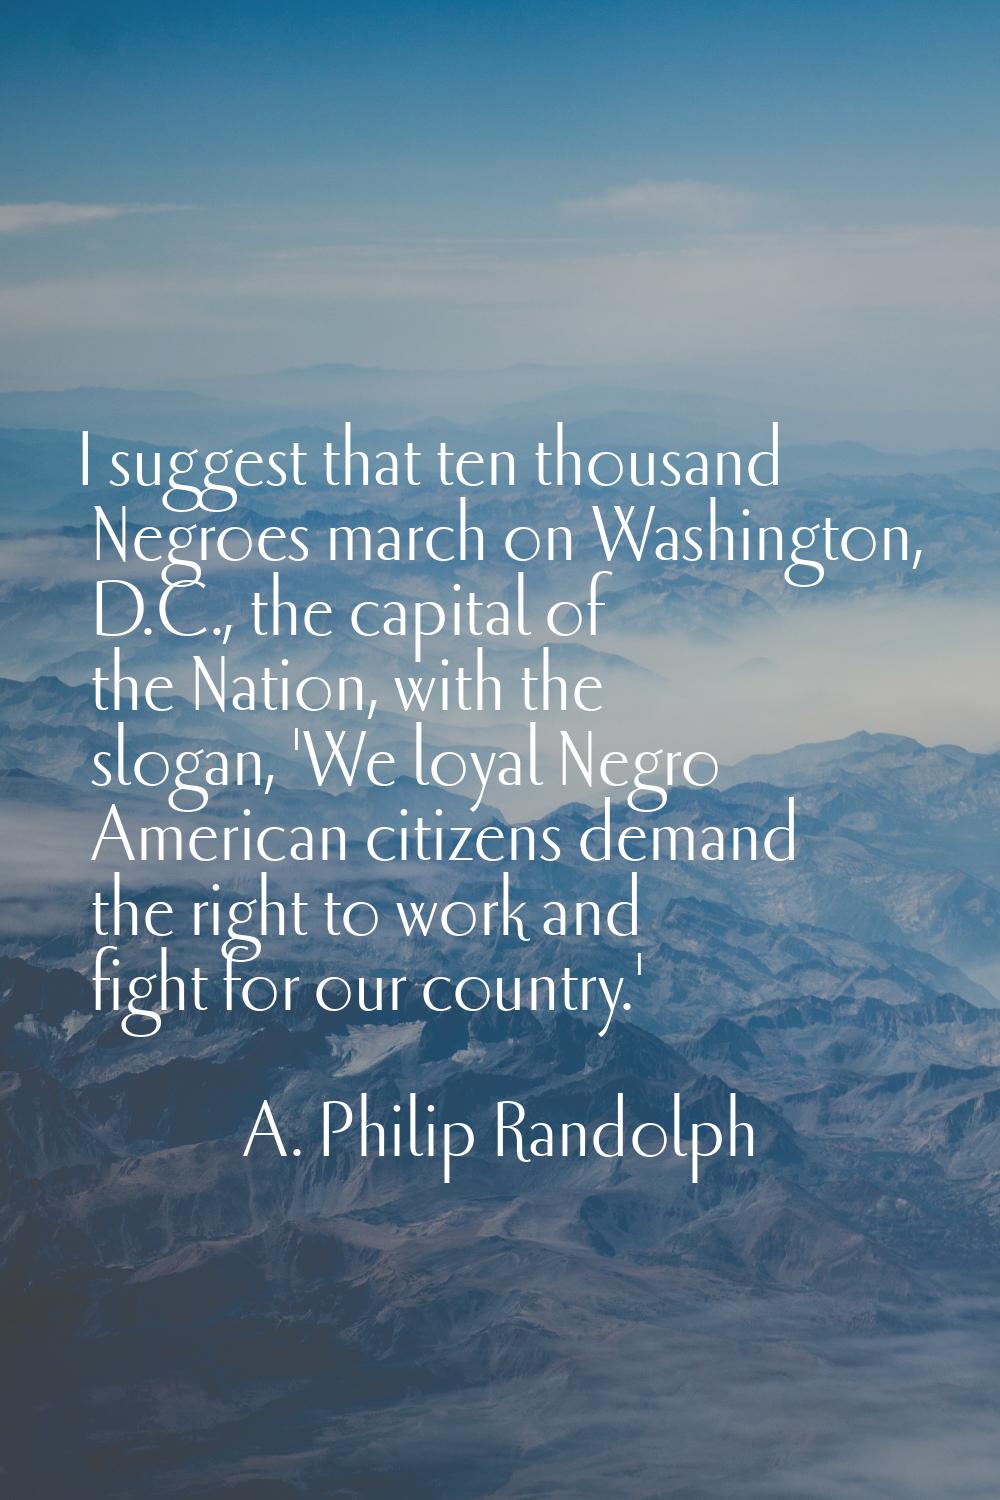 I suggest that ten thousand Negroes march on Washington, D.C., the capital of the Nation, with the 